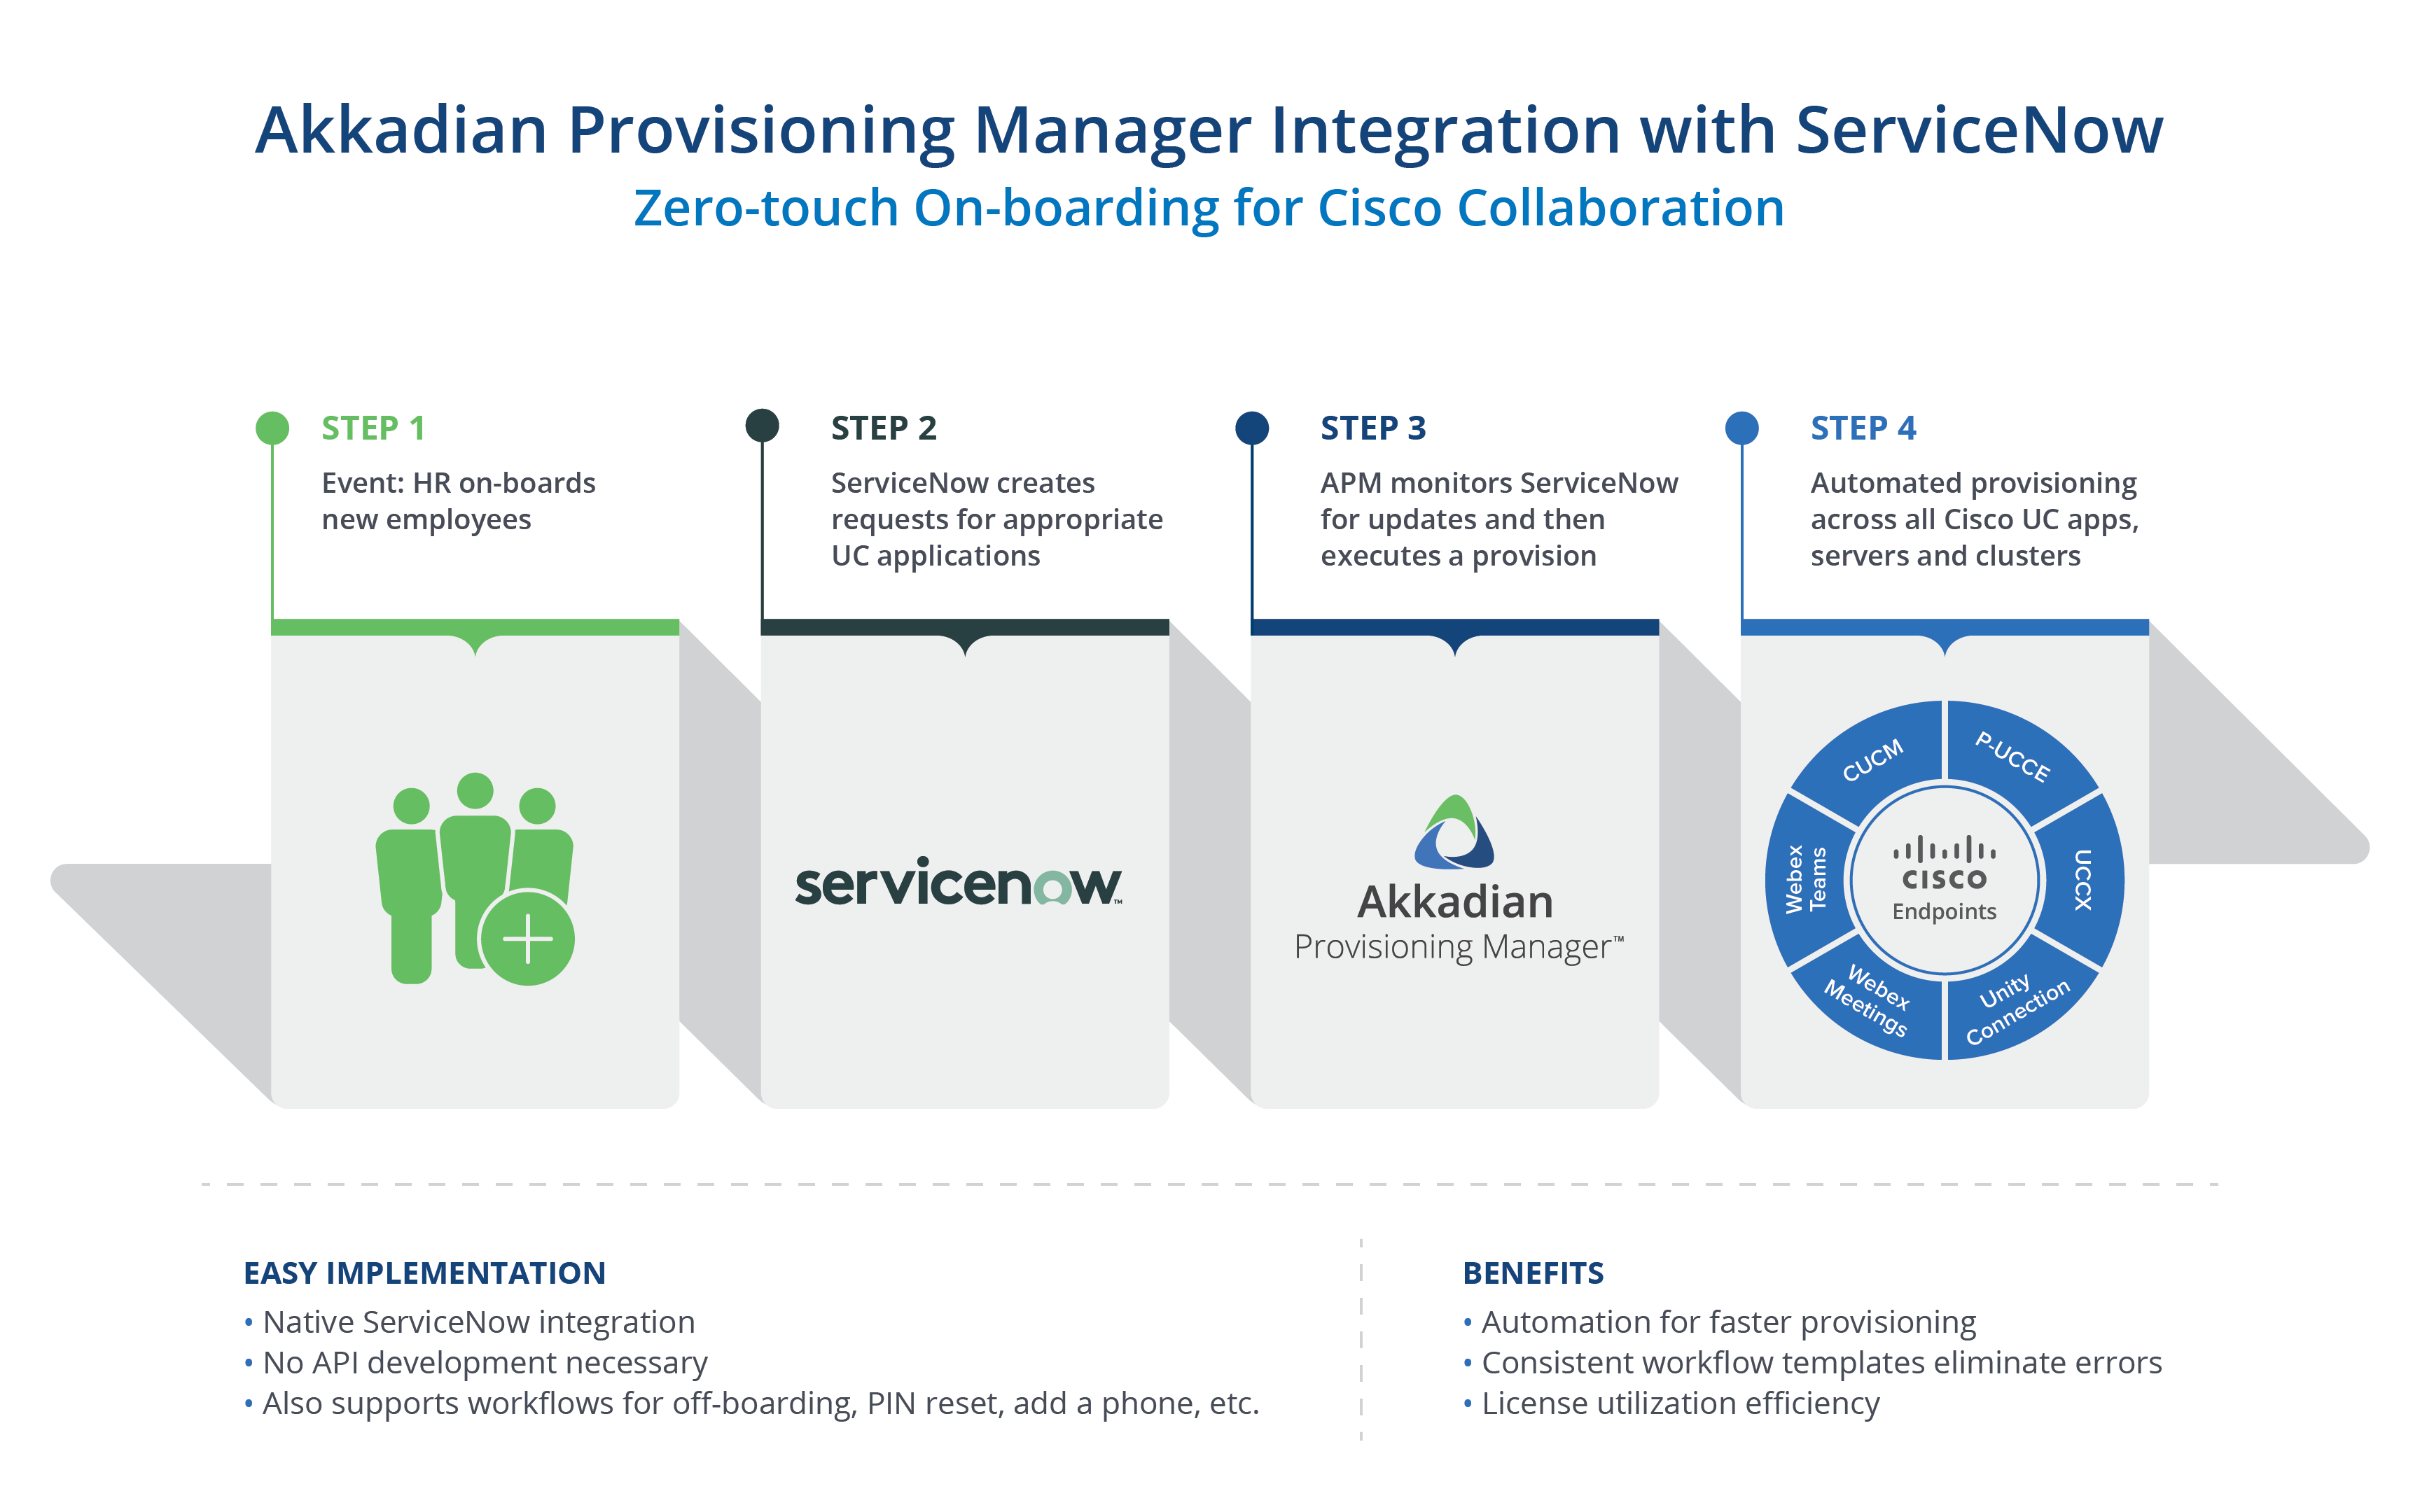 Zero-touch On-boarding for Cisco Collaboration